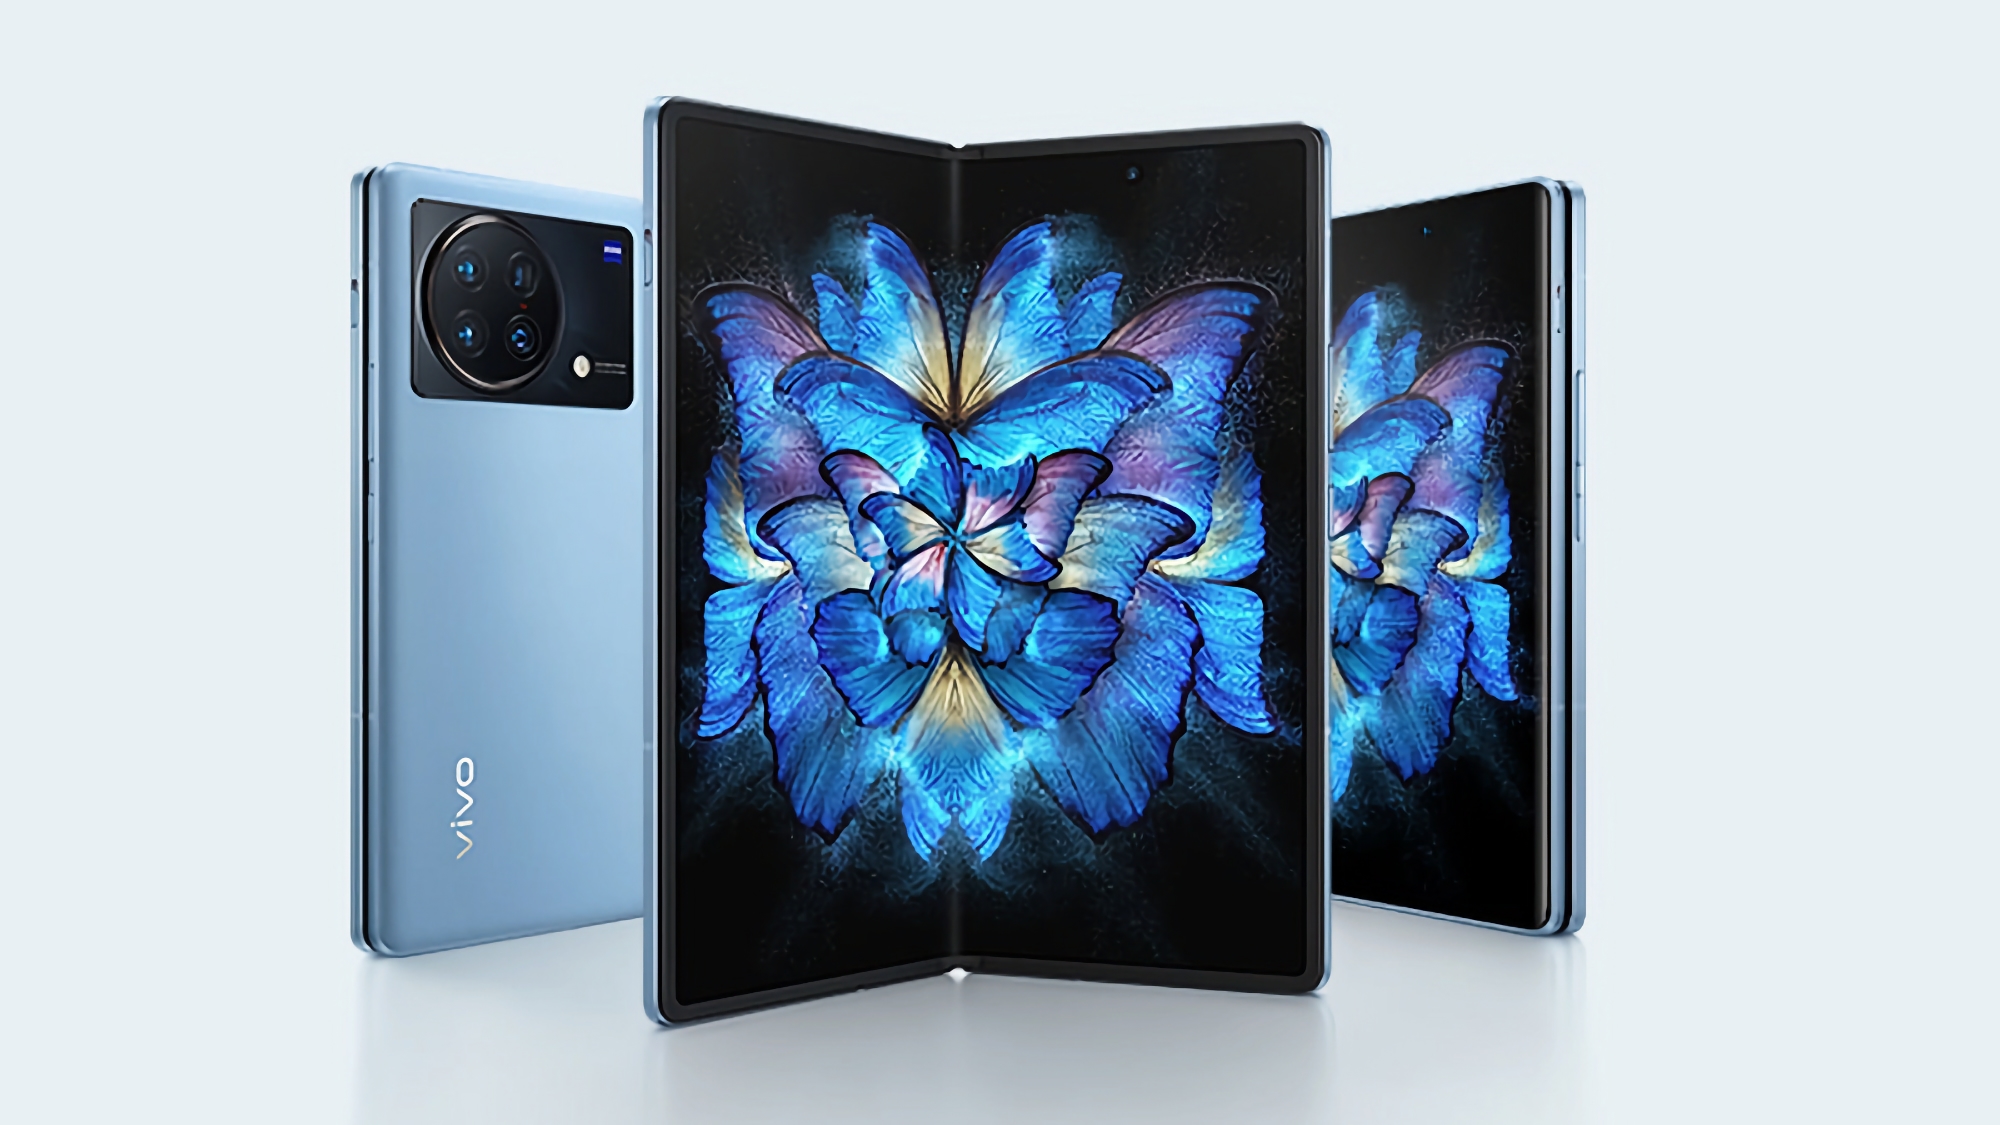 An insider has revealed when the vivo X Fold 3 and vivo X Fold 3 Pro foldable smartphones will be released